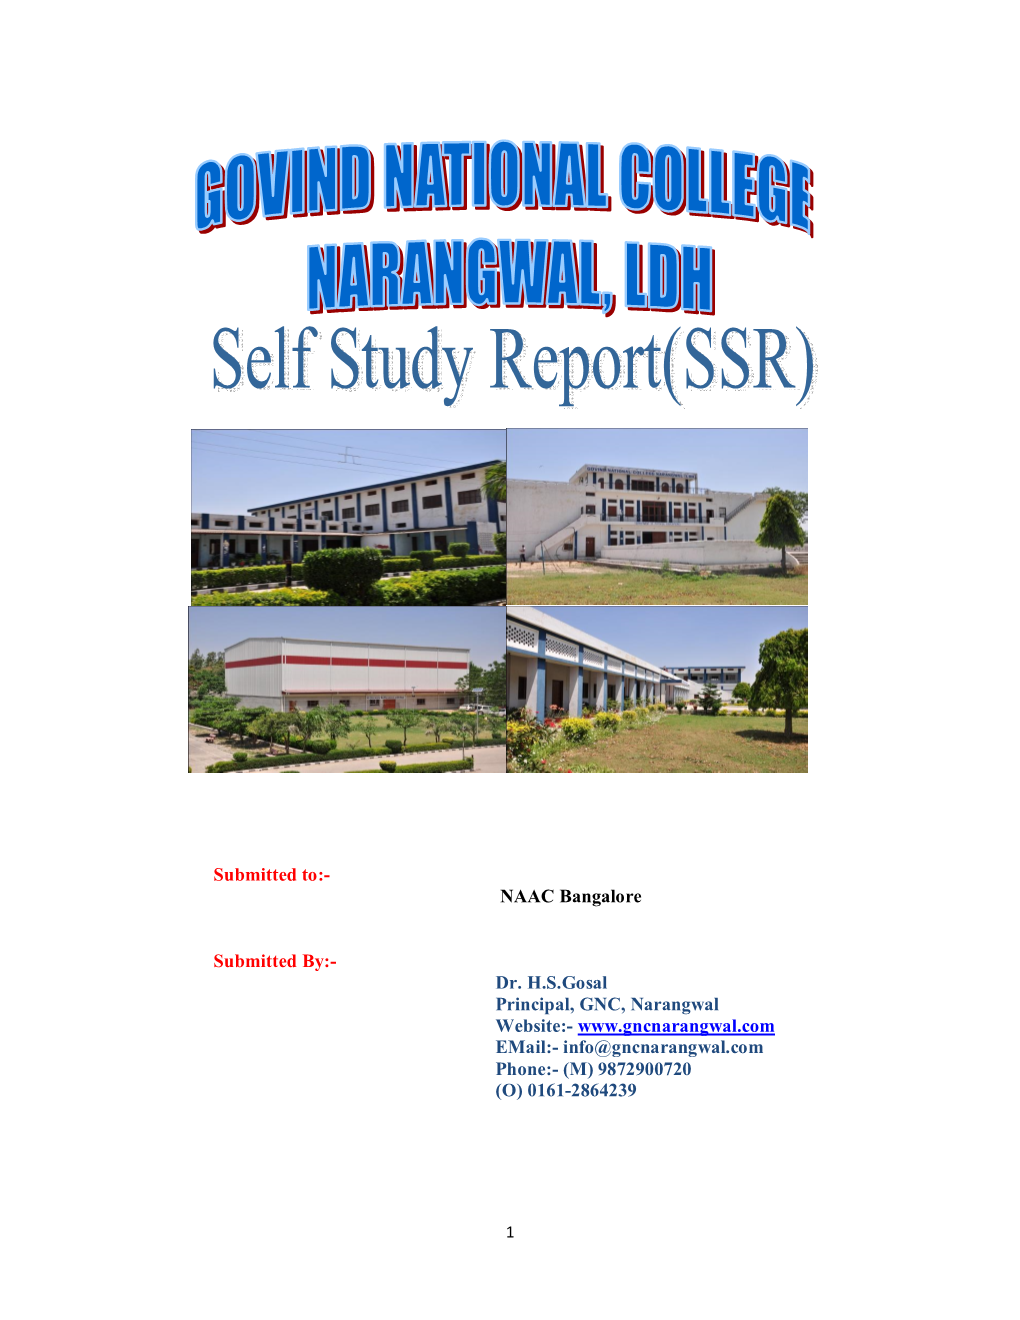 NAAC Bangalore Submitted By:- Dr. Hsgosal Principal, GNC, Narangwal Website